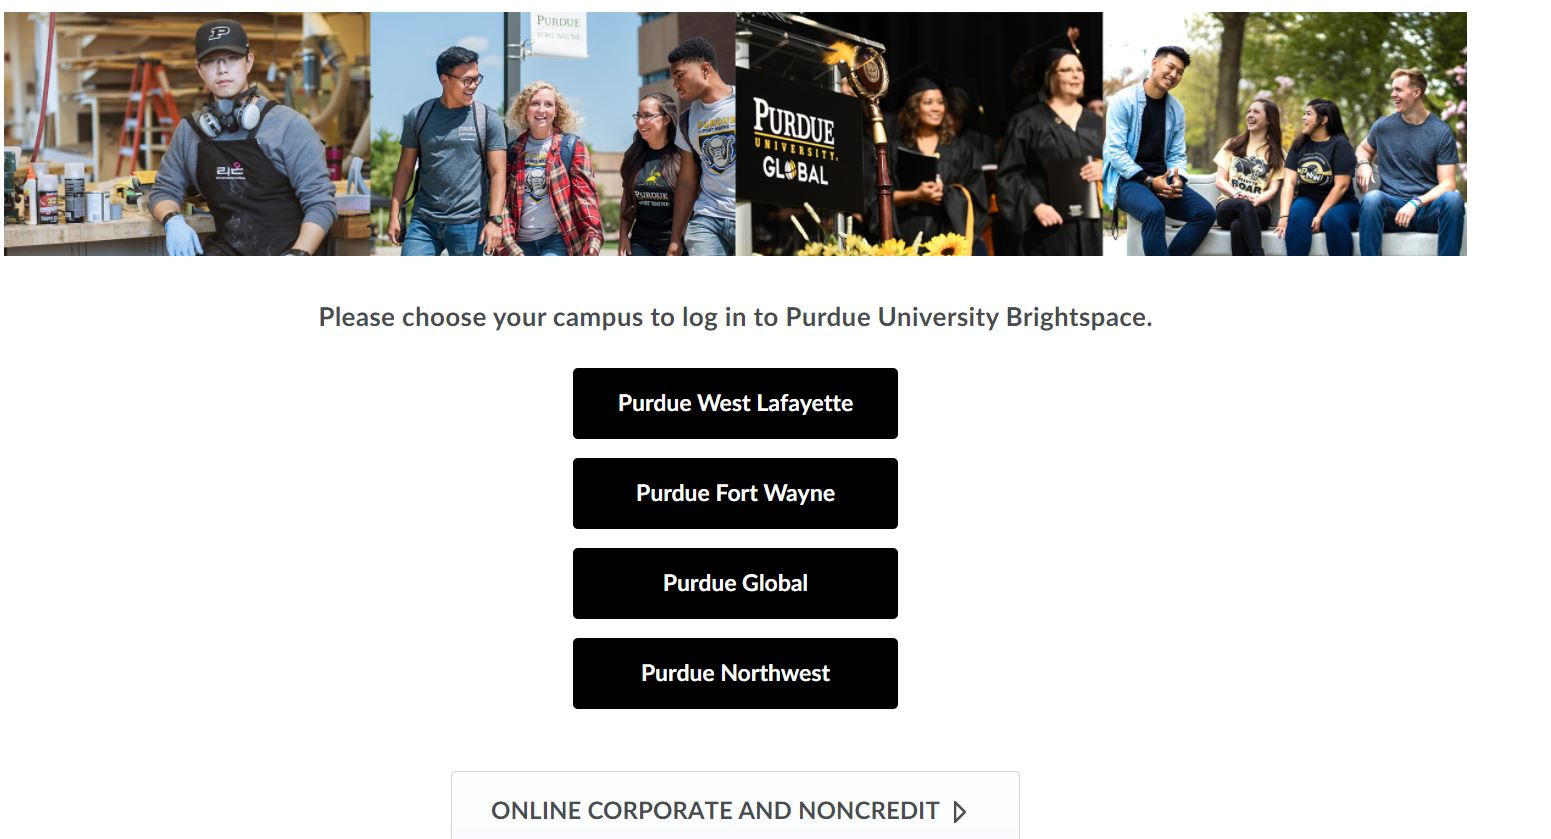 Purdue Brightspace - Stay Connected With Purdue University's Professors And Students